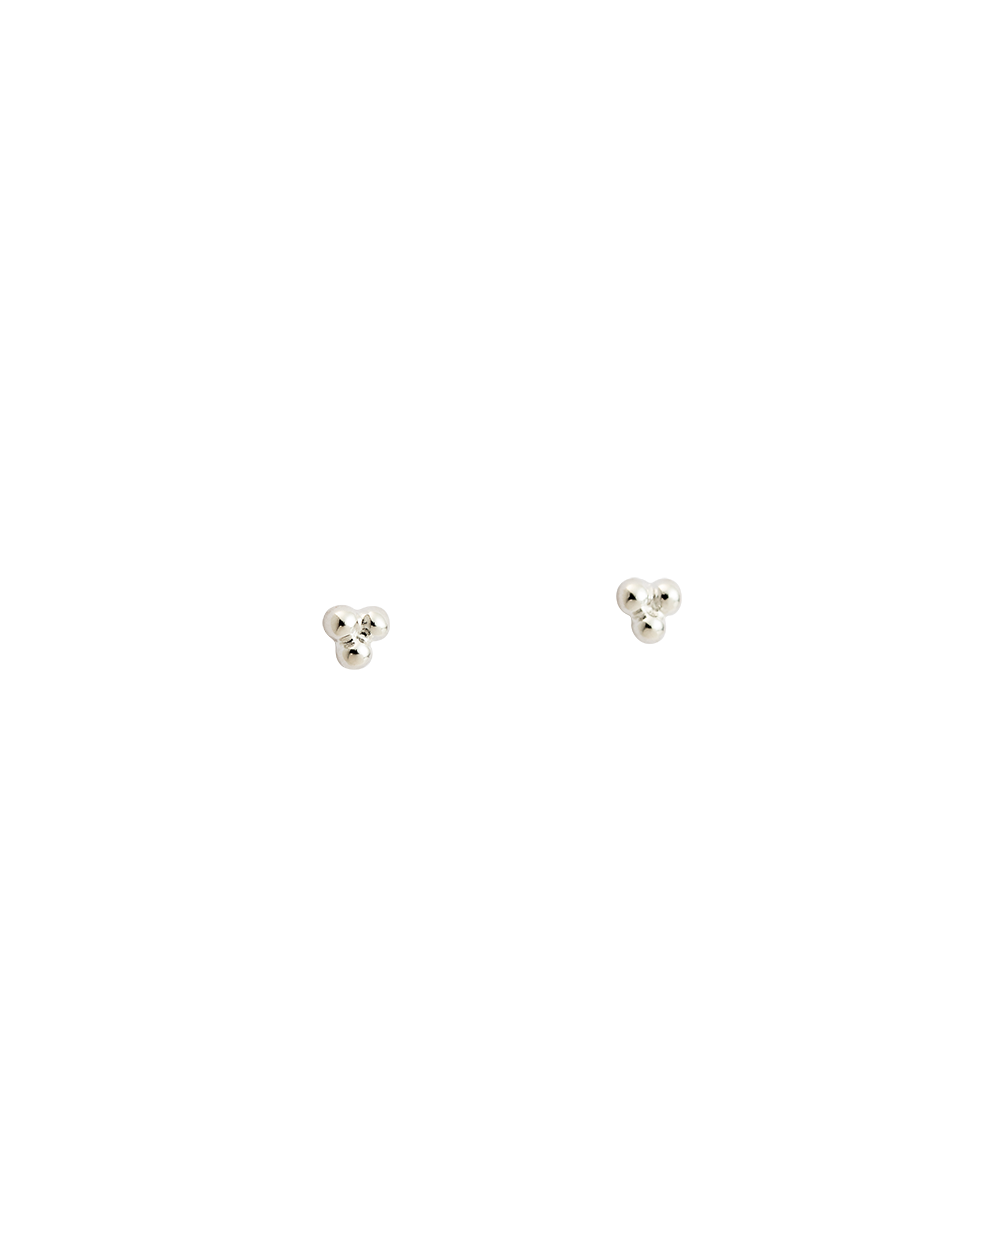 THREE DOT STUDS (STERLING SILVER) - IMAGE 1